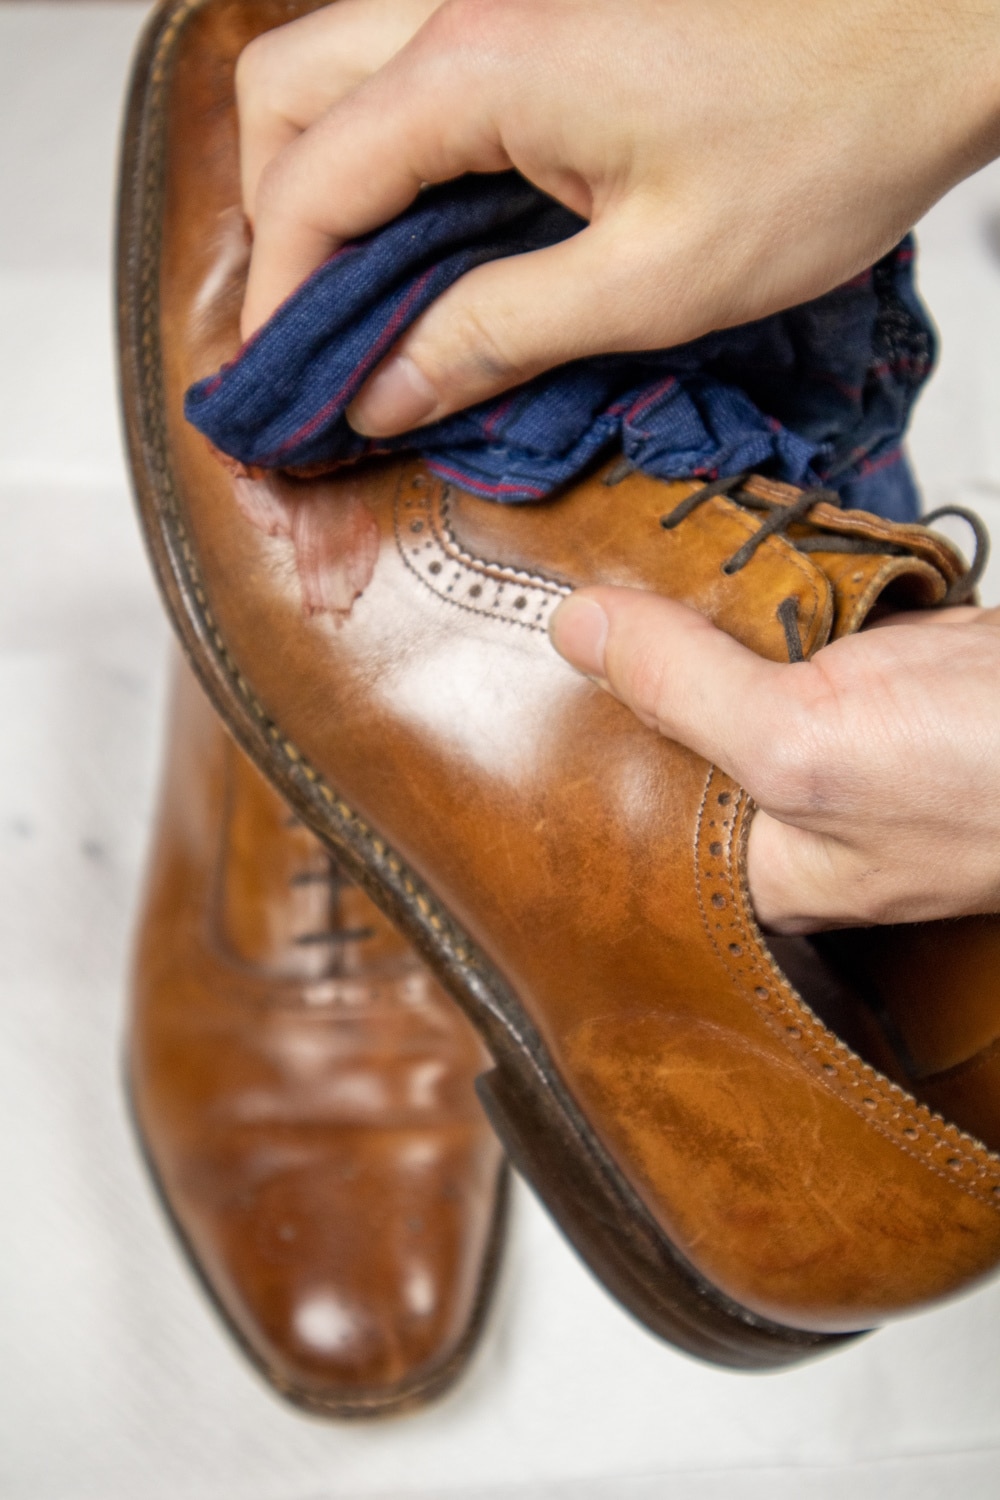 How to Shine Your Shoes the Right Way - The GentleManual